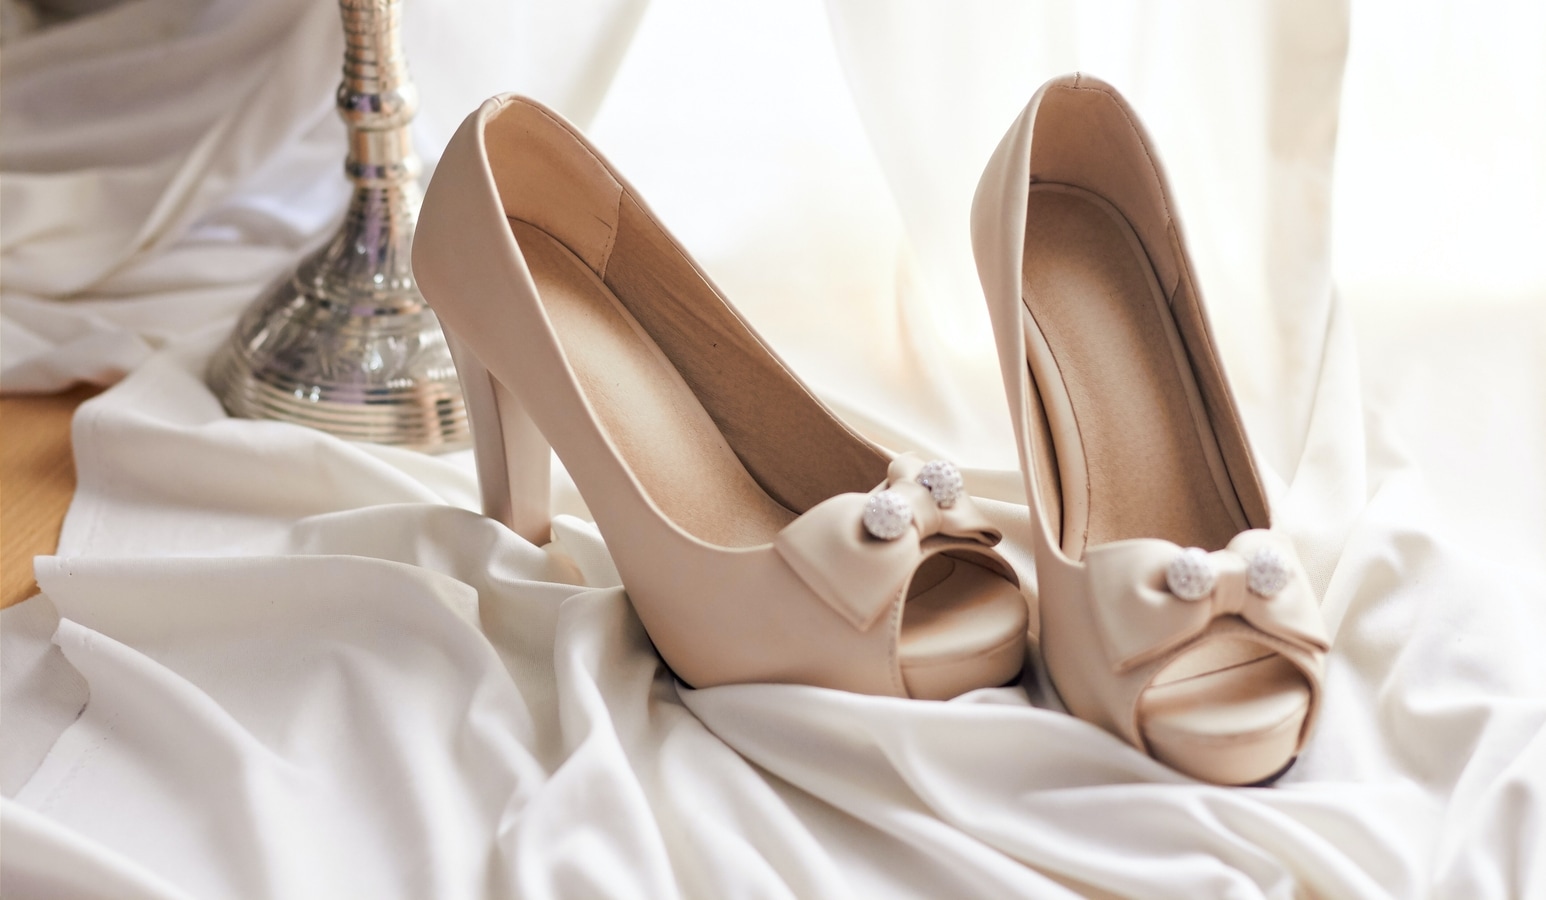 Science proves high heels do have power over men